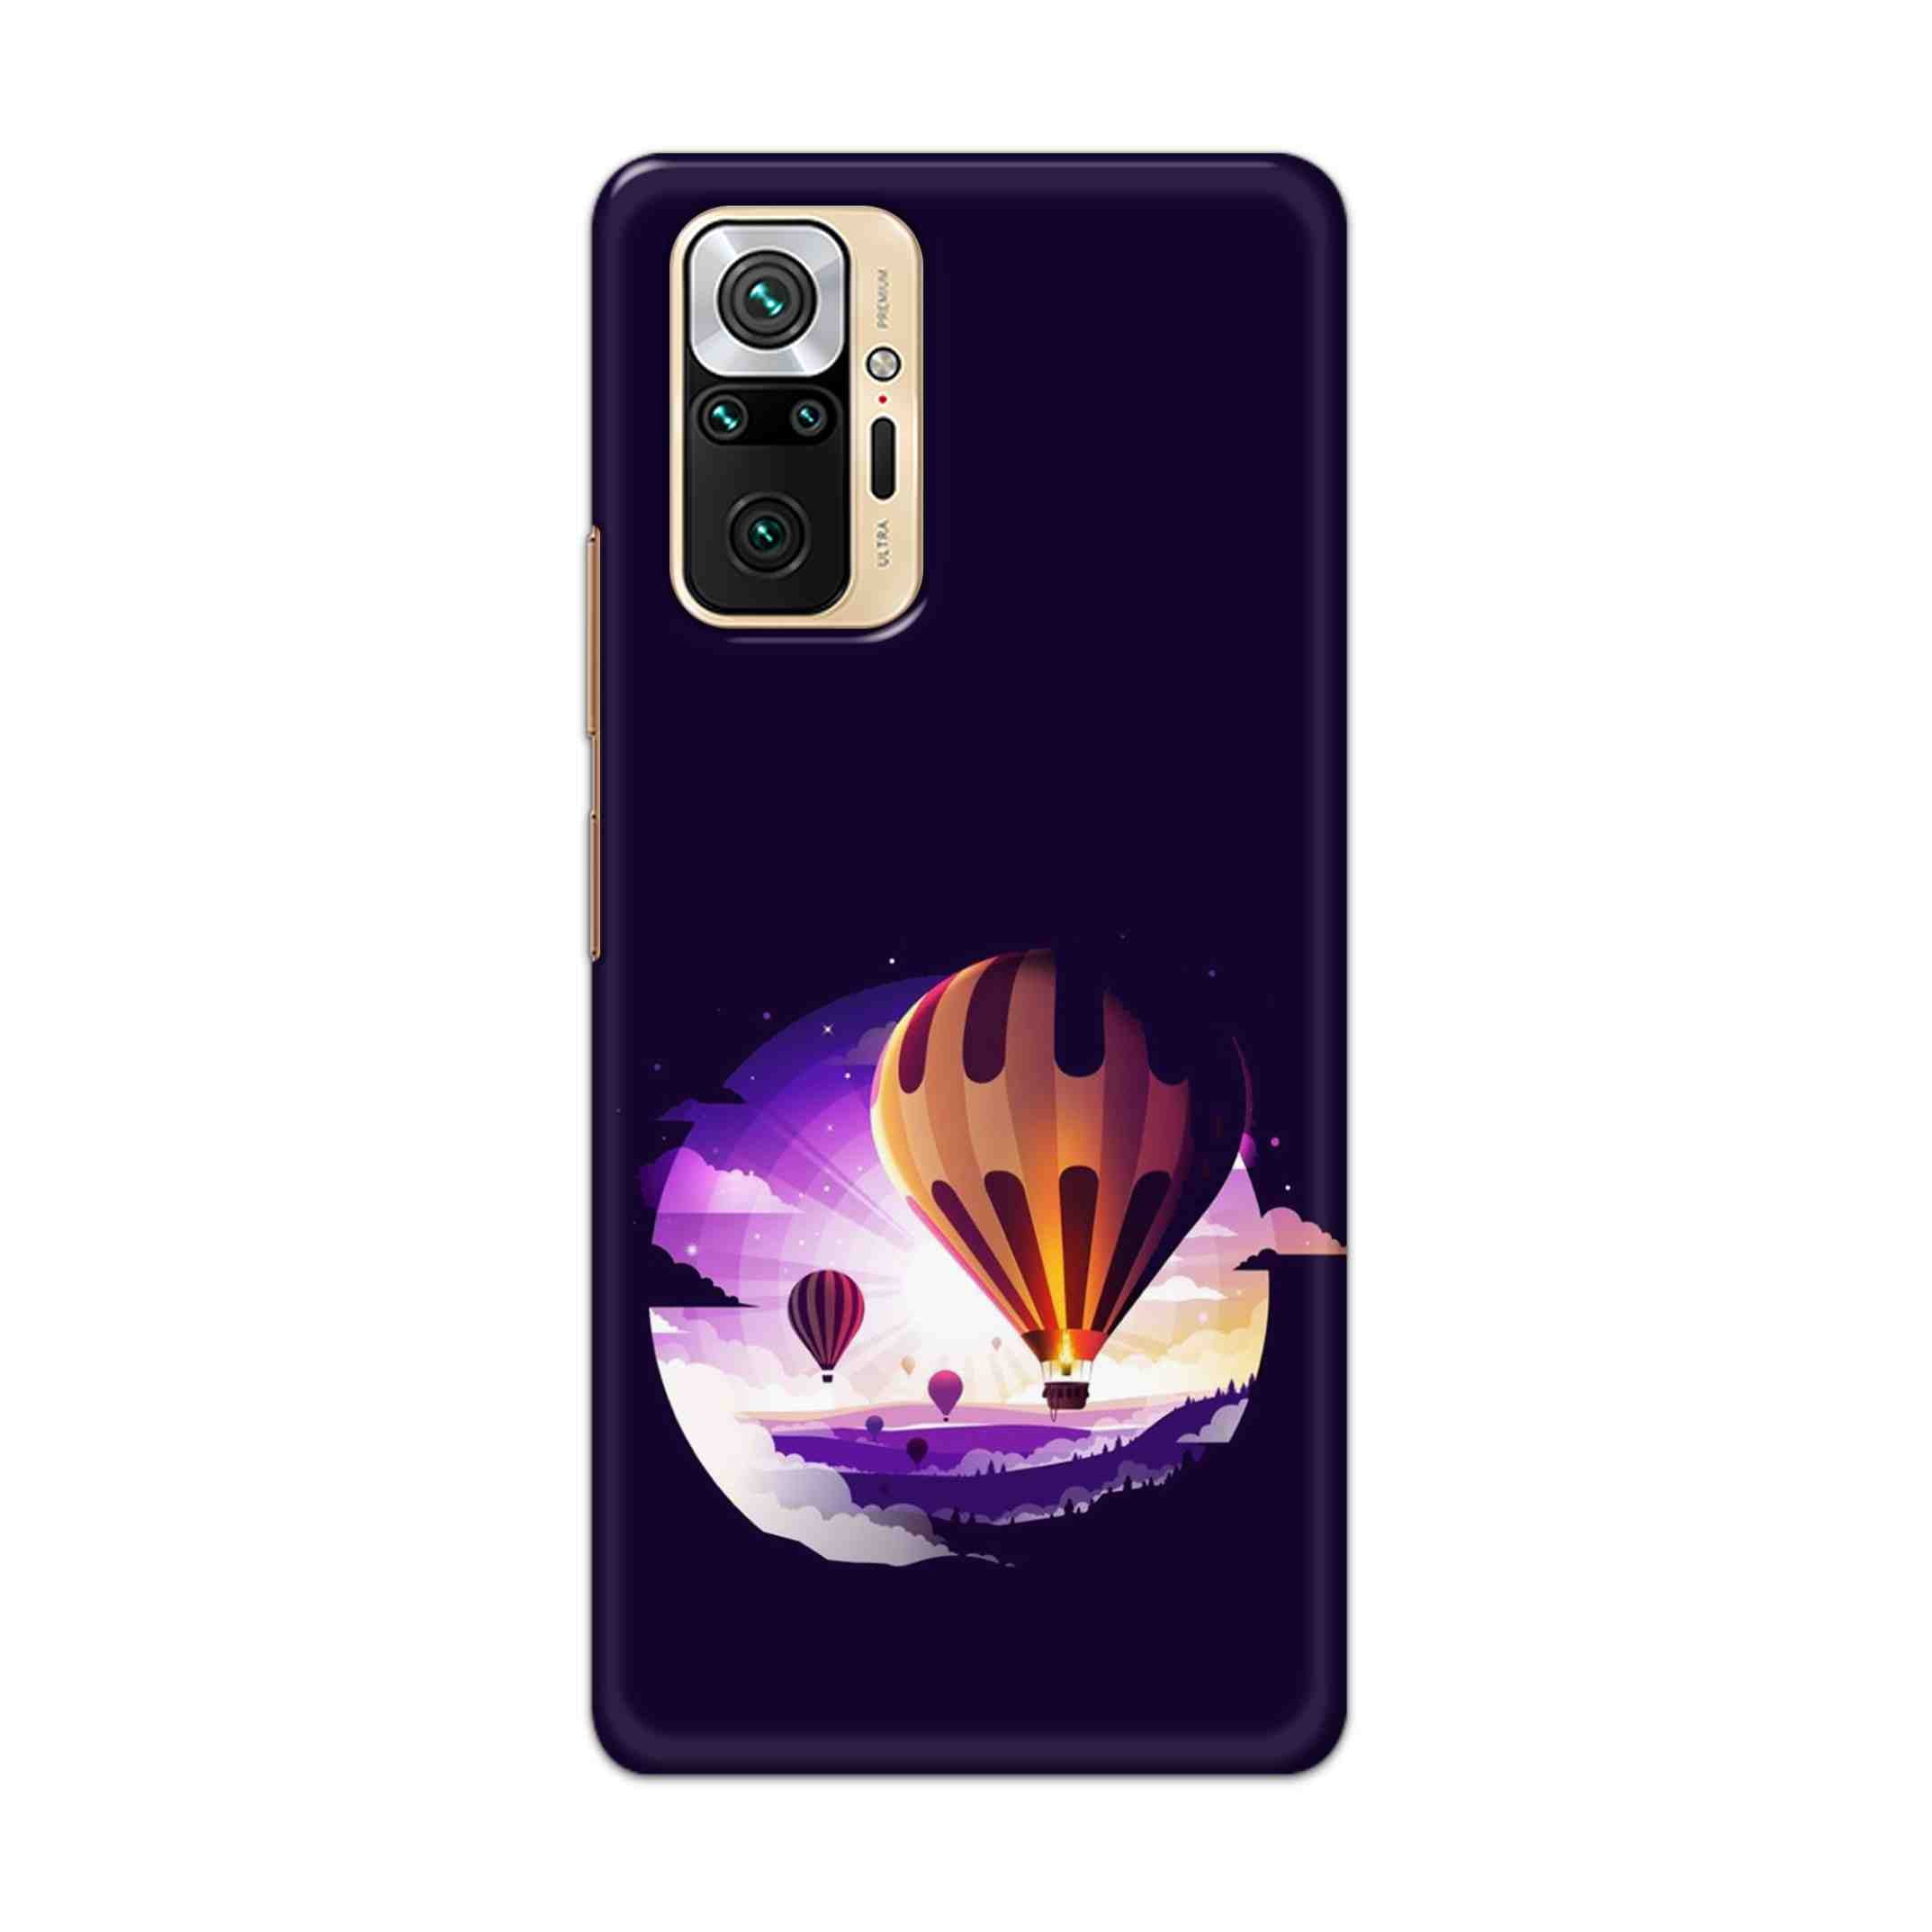 Buy Ballon Hard Back Mobile Phone Case Cover For Redmi Note 10 Pro Online